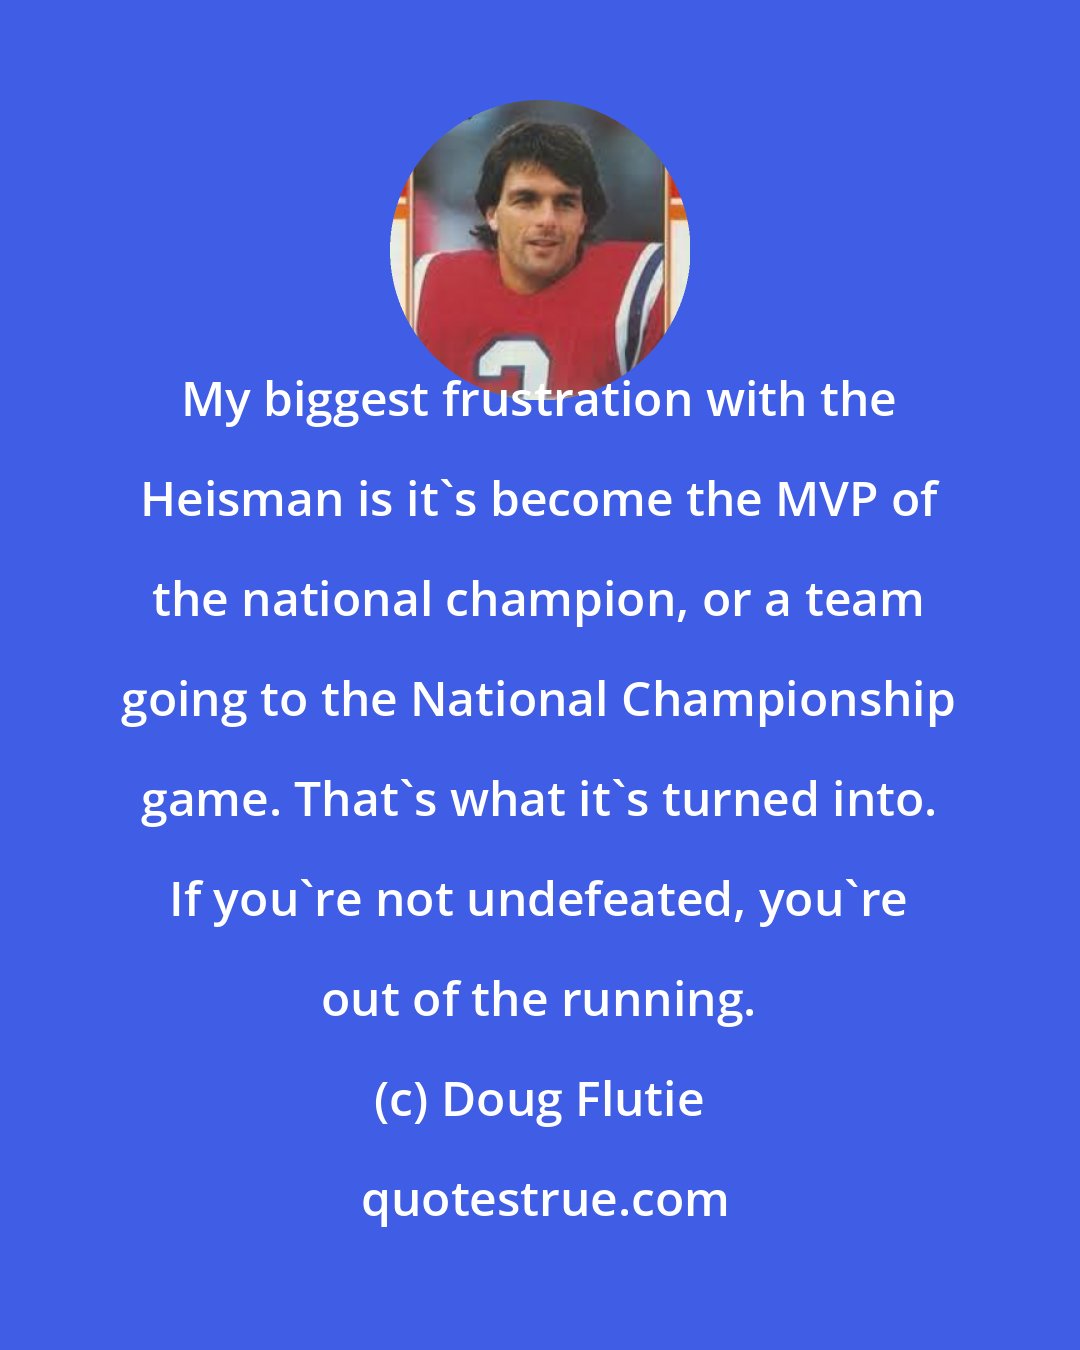 Doug Flutie: My biggest frustration with the Heisman is it's become the MVP of the national champion, or a team going to the National Championship game. That's what it's turned into. If you're not undefeated, you're out of the running.